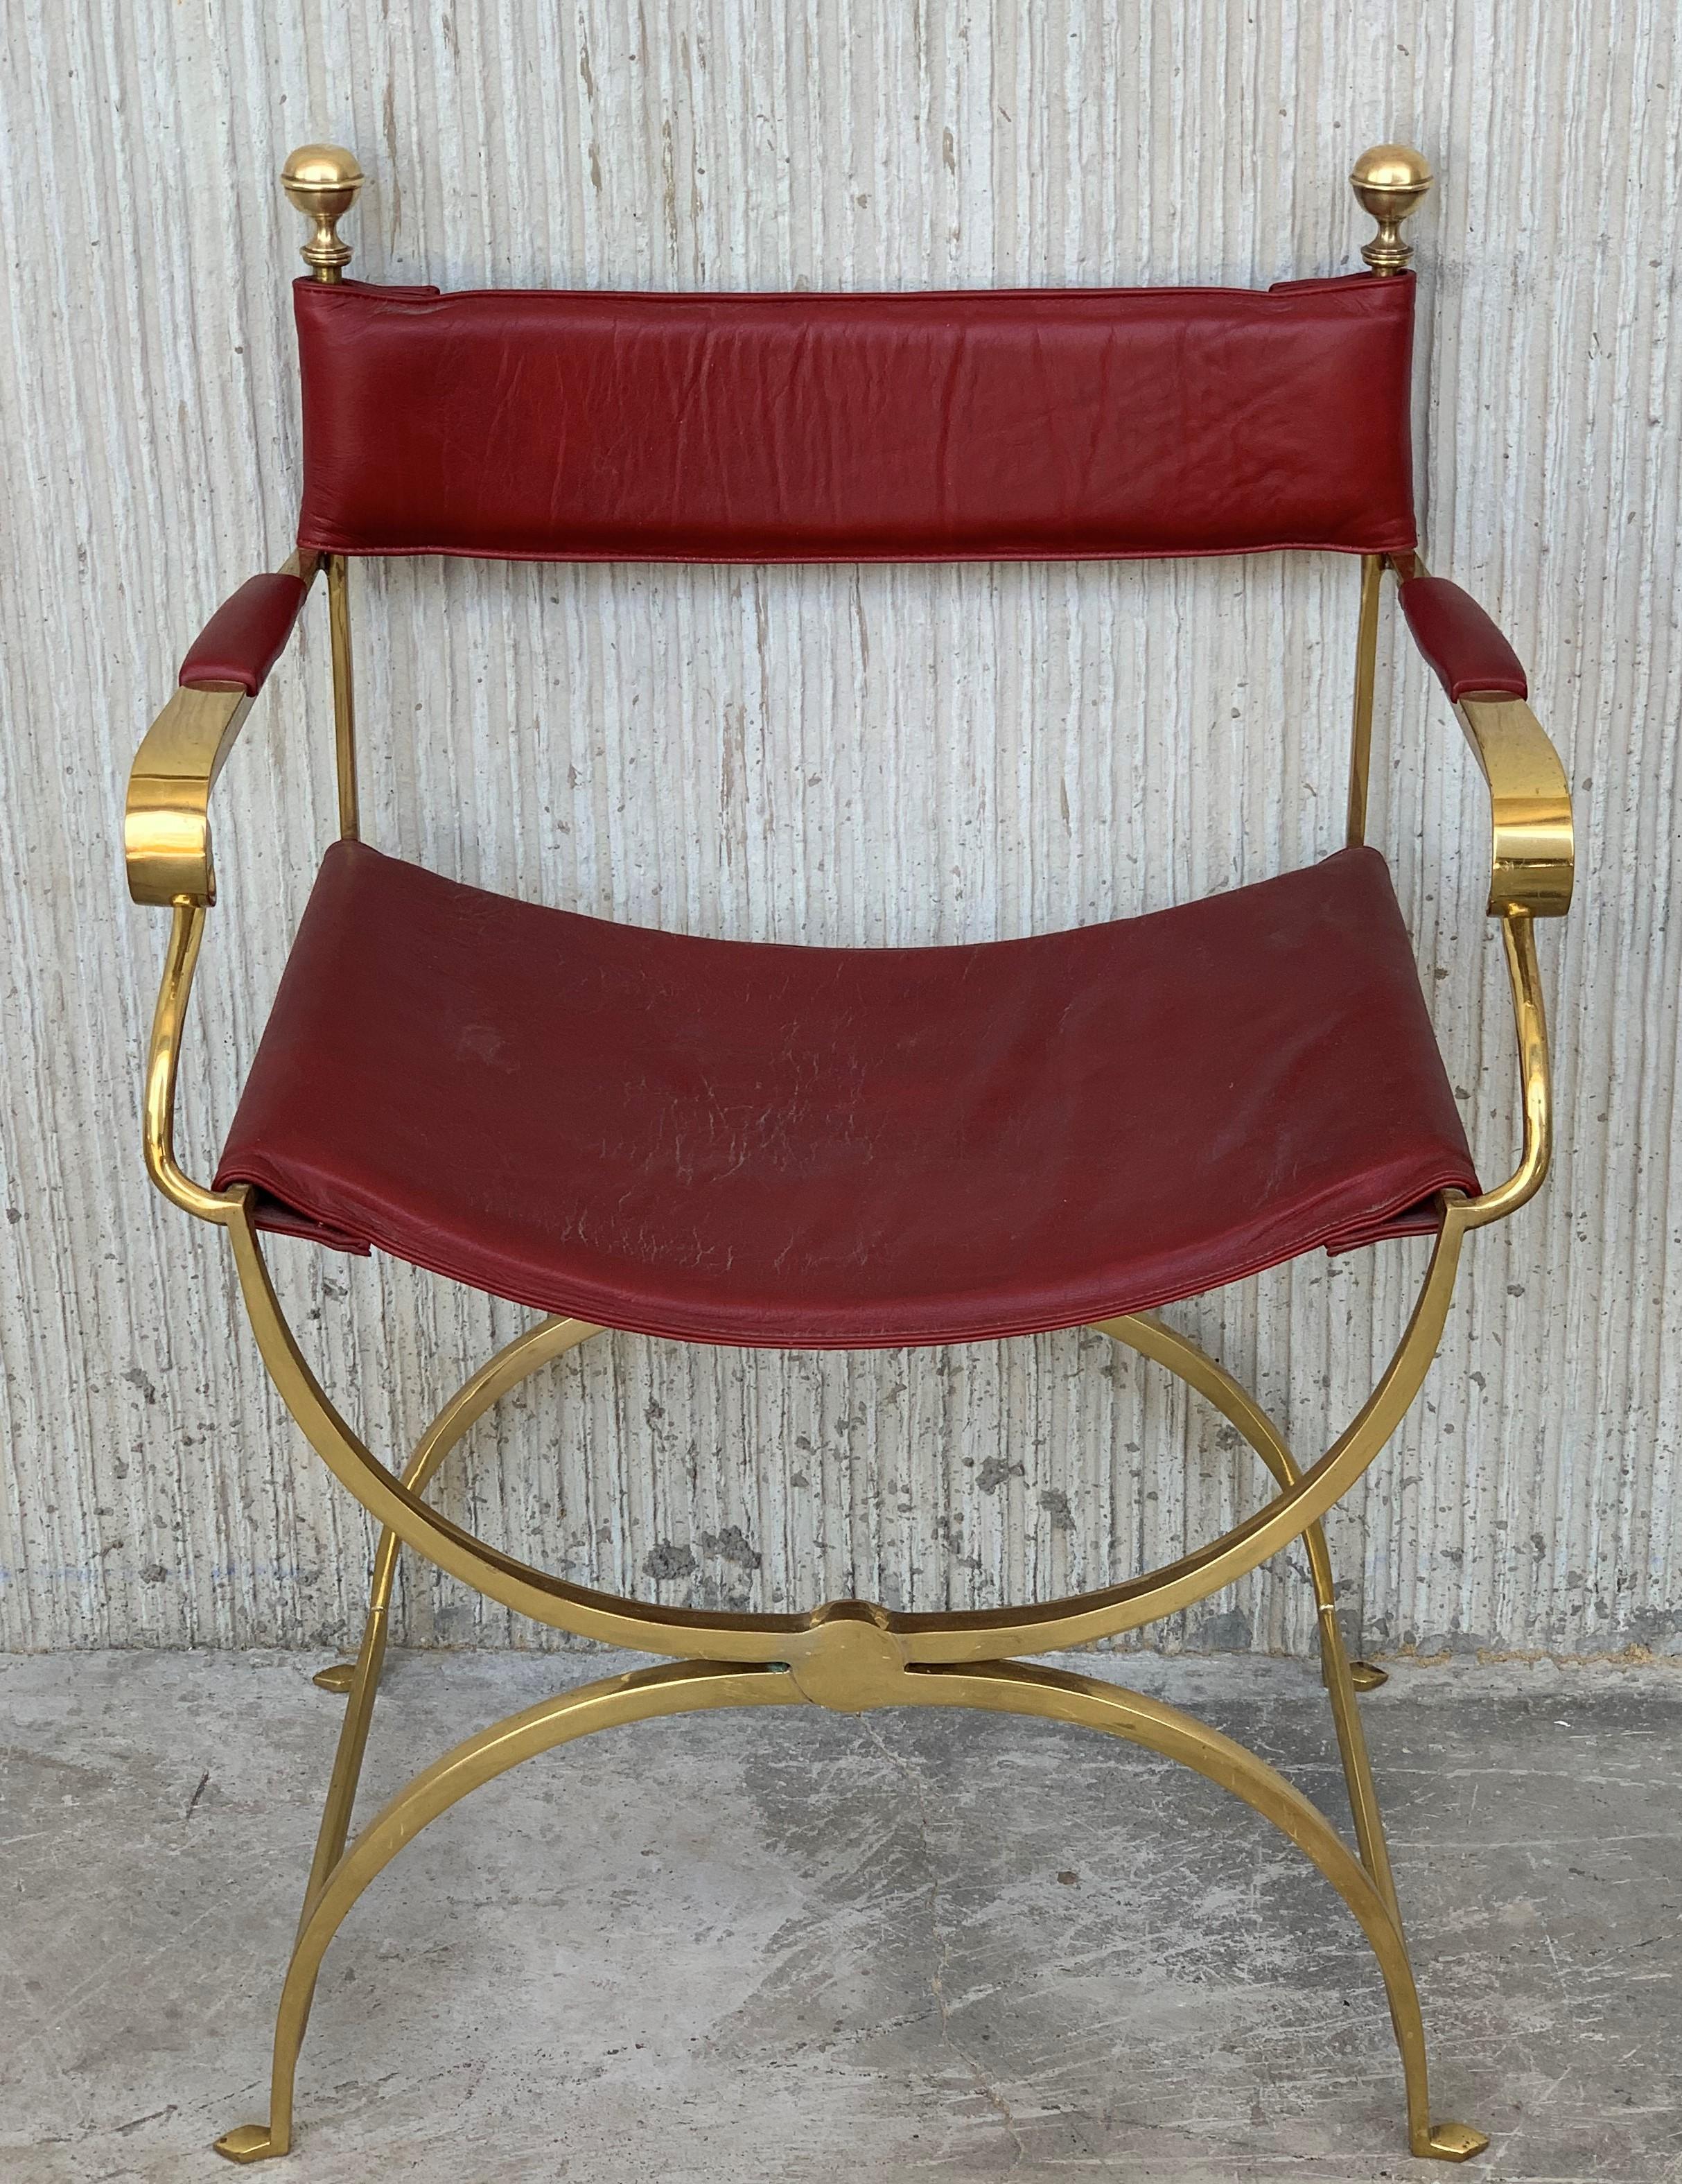 1960s Italian Hollywood Regency Chrome and Leather Savonarola Director's Chairs For Sale 3